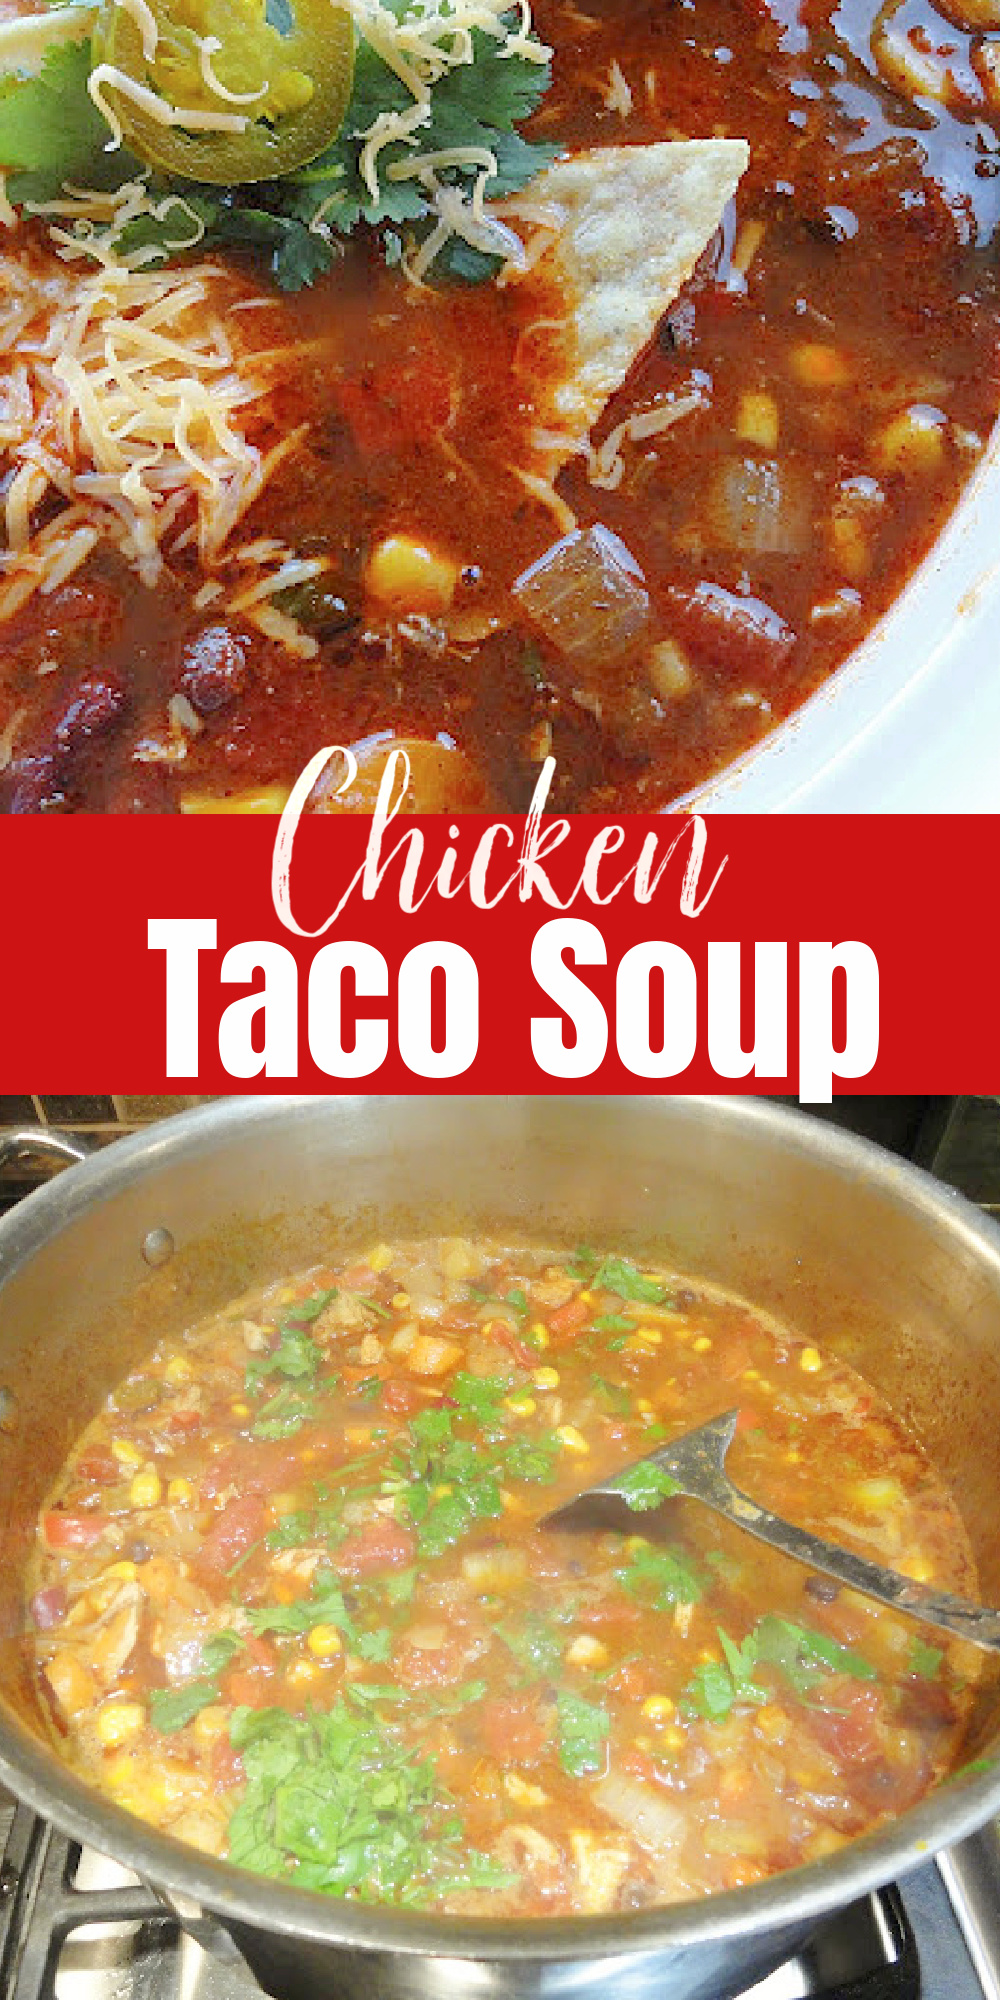 Chicken Taco Soup is a quick and easy soup recipe! Top photo is of Chicken Taco Soup and bottom photo is Chicken Taco Soup in a soup pot.